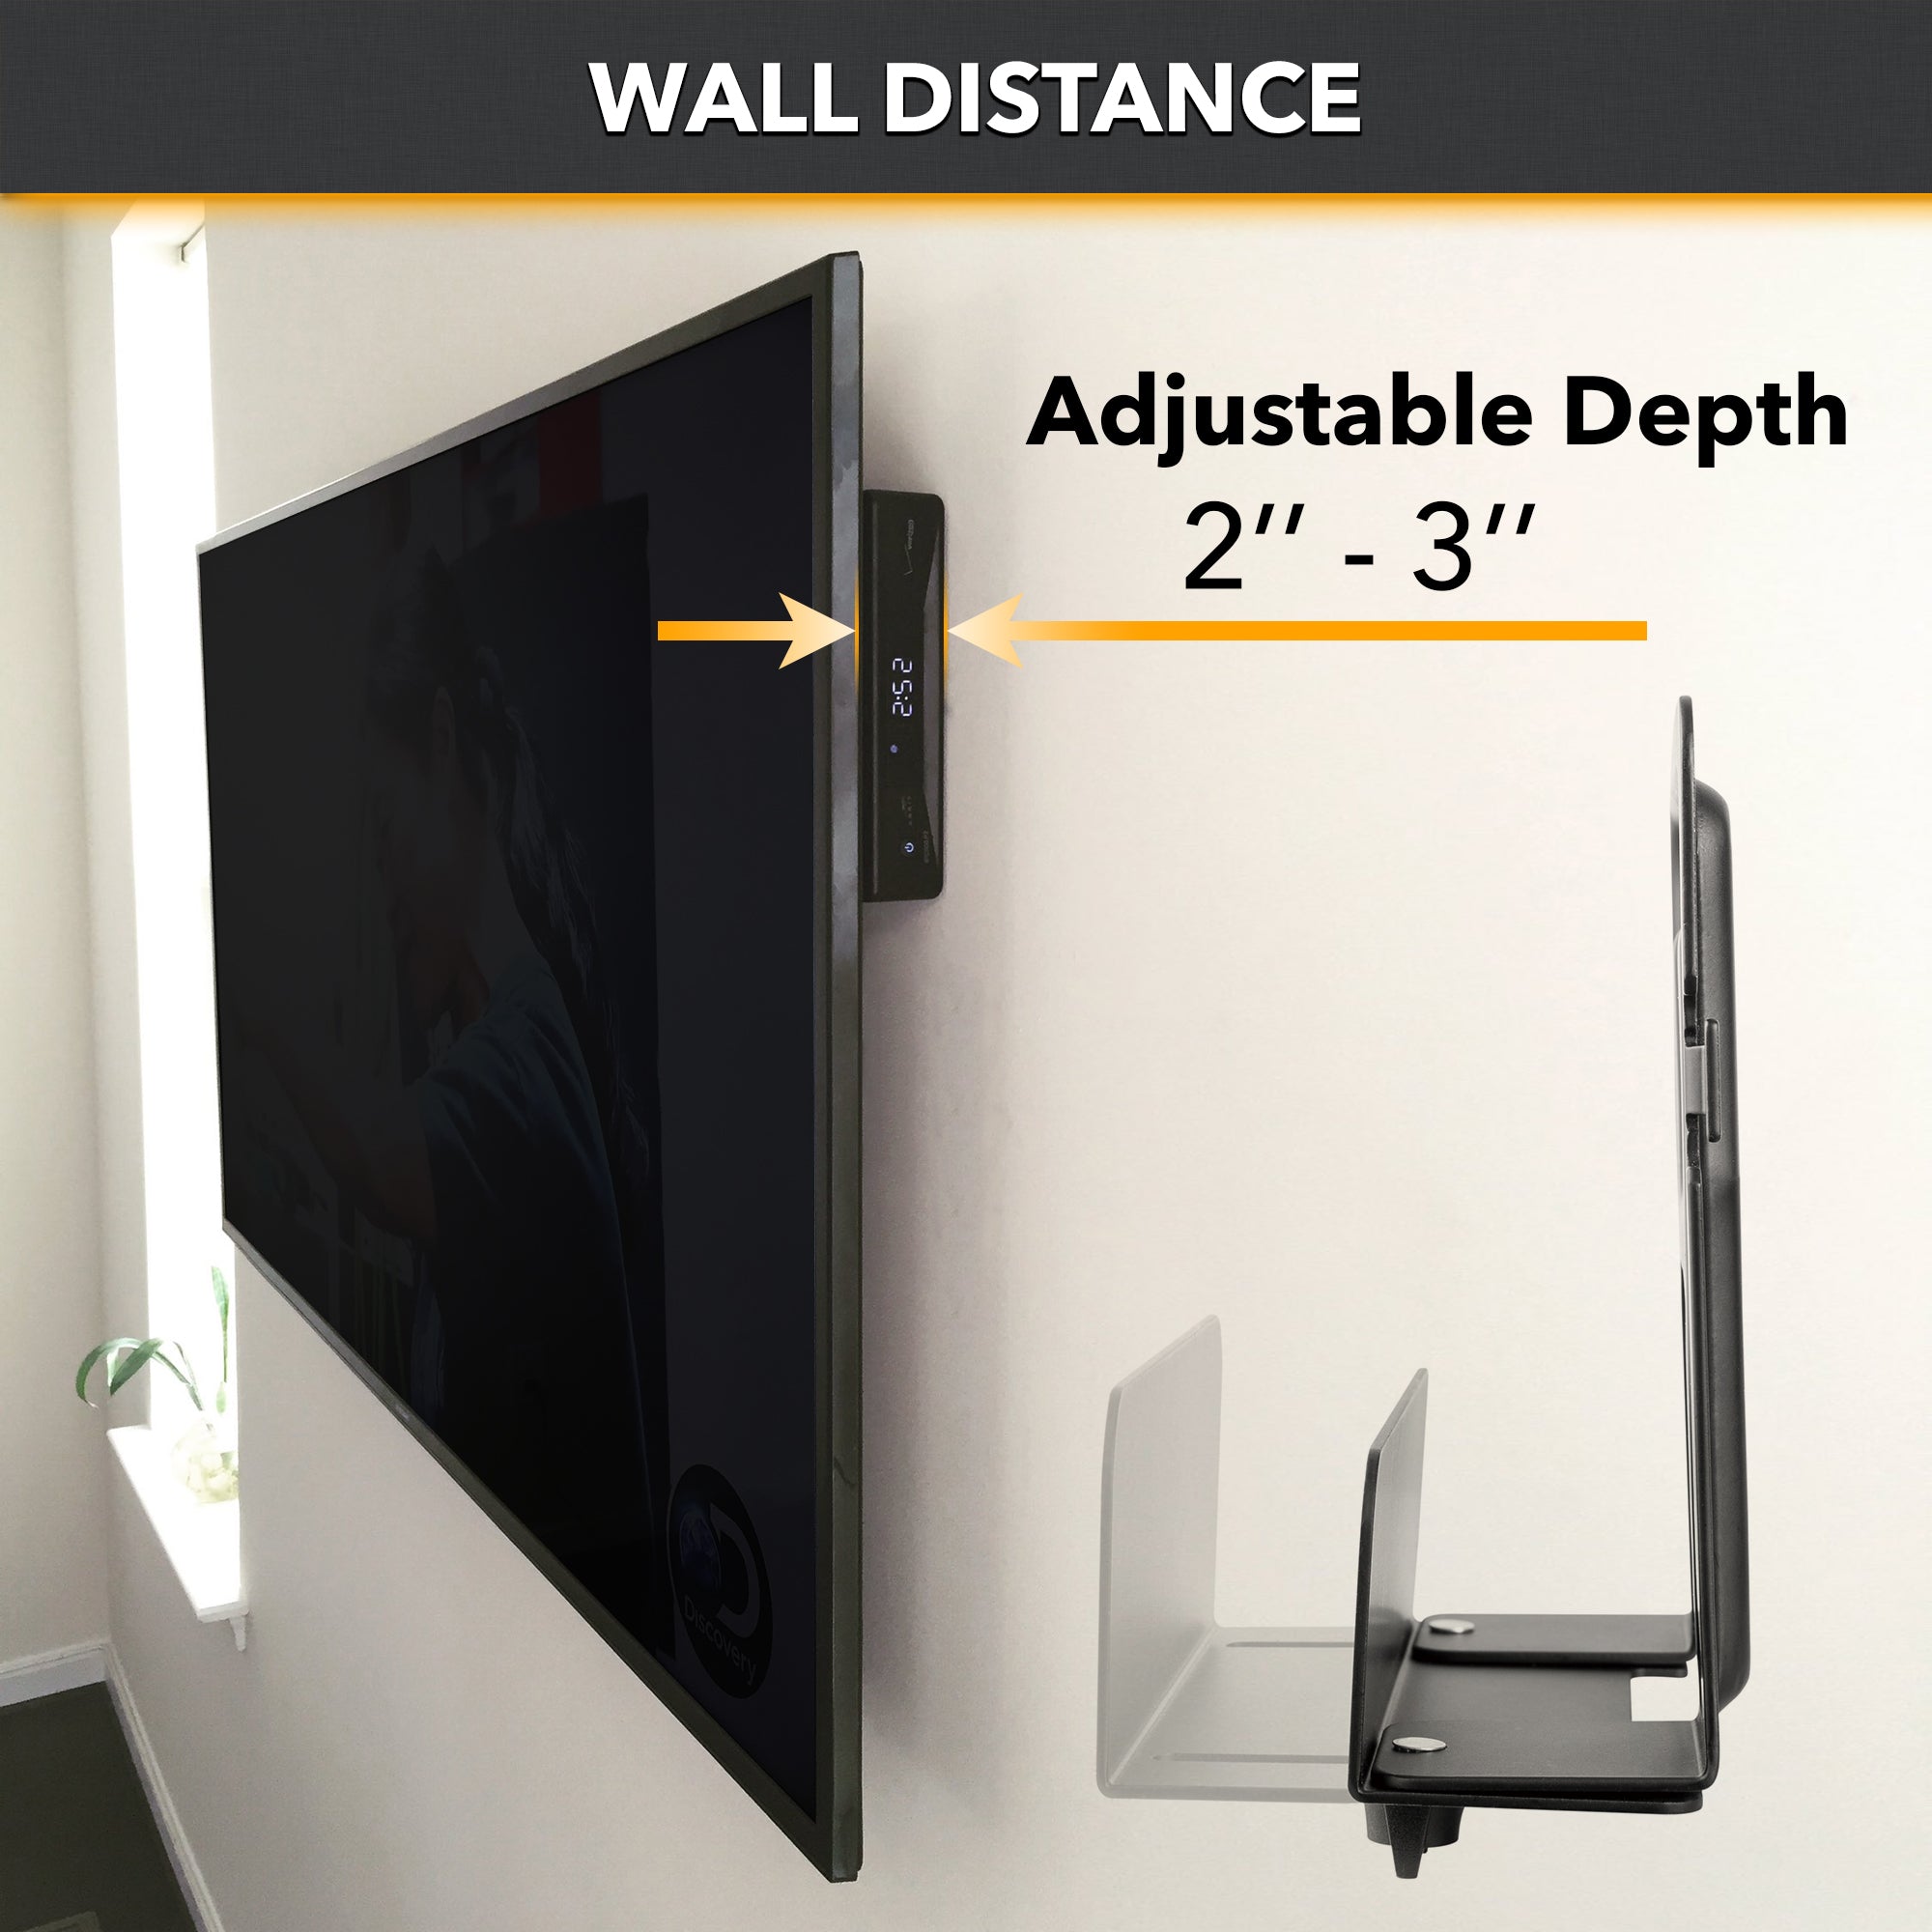 Hide the cables behind a wall mounted TV